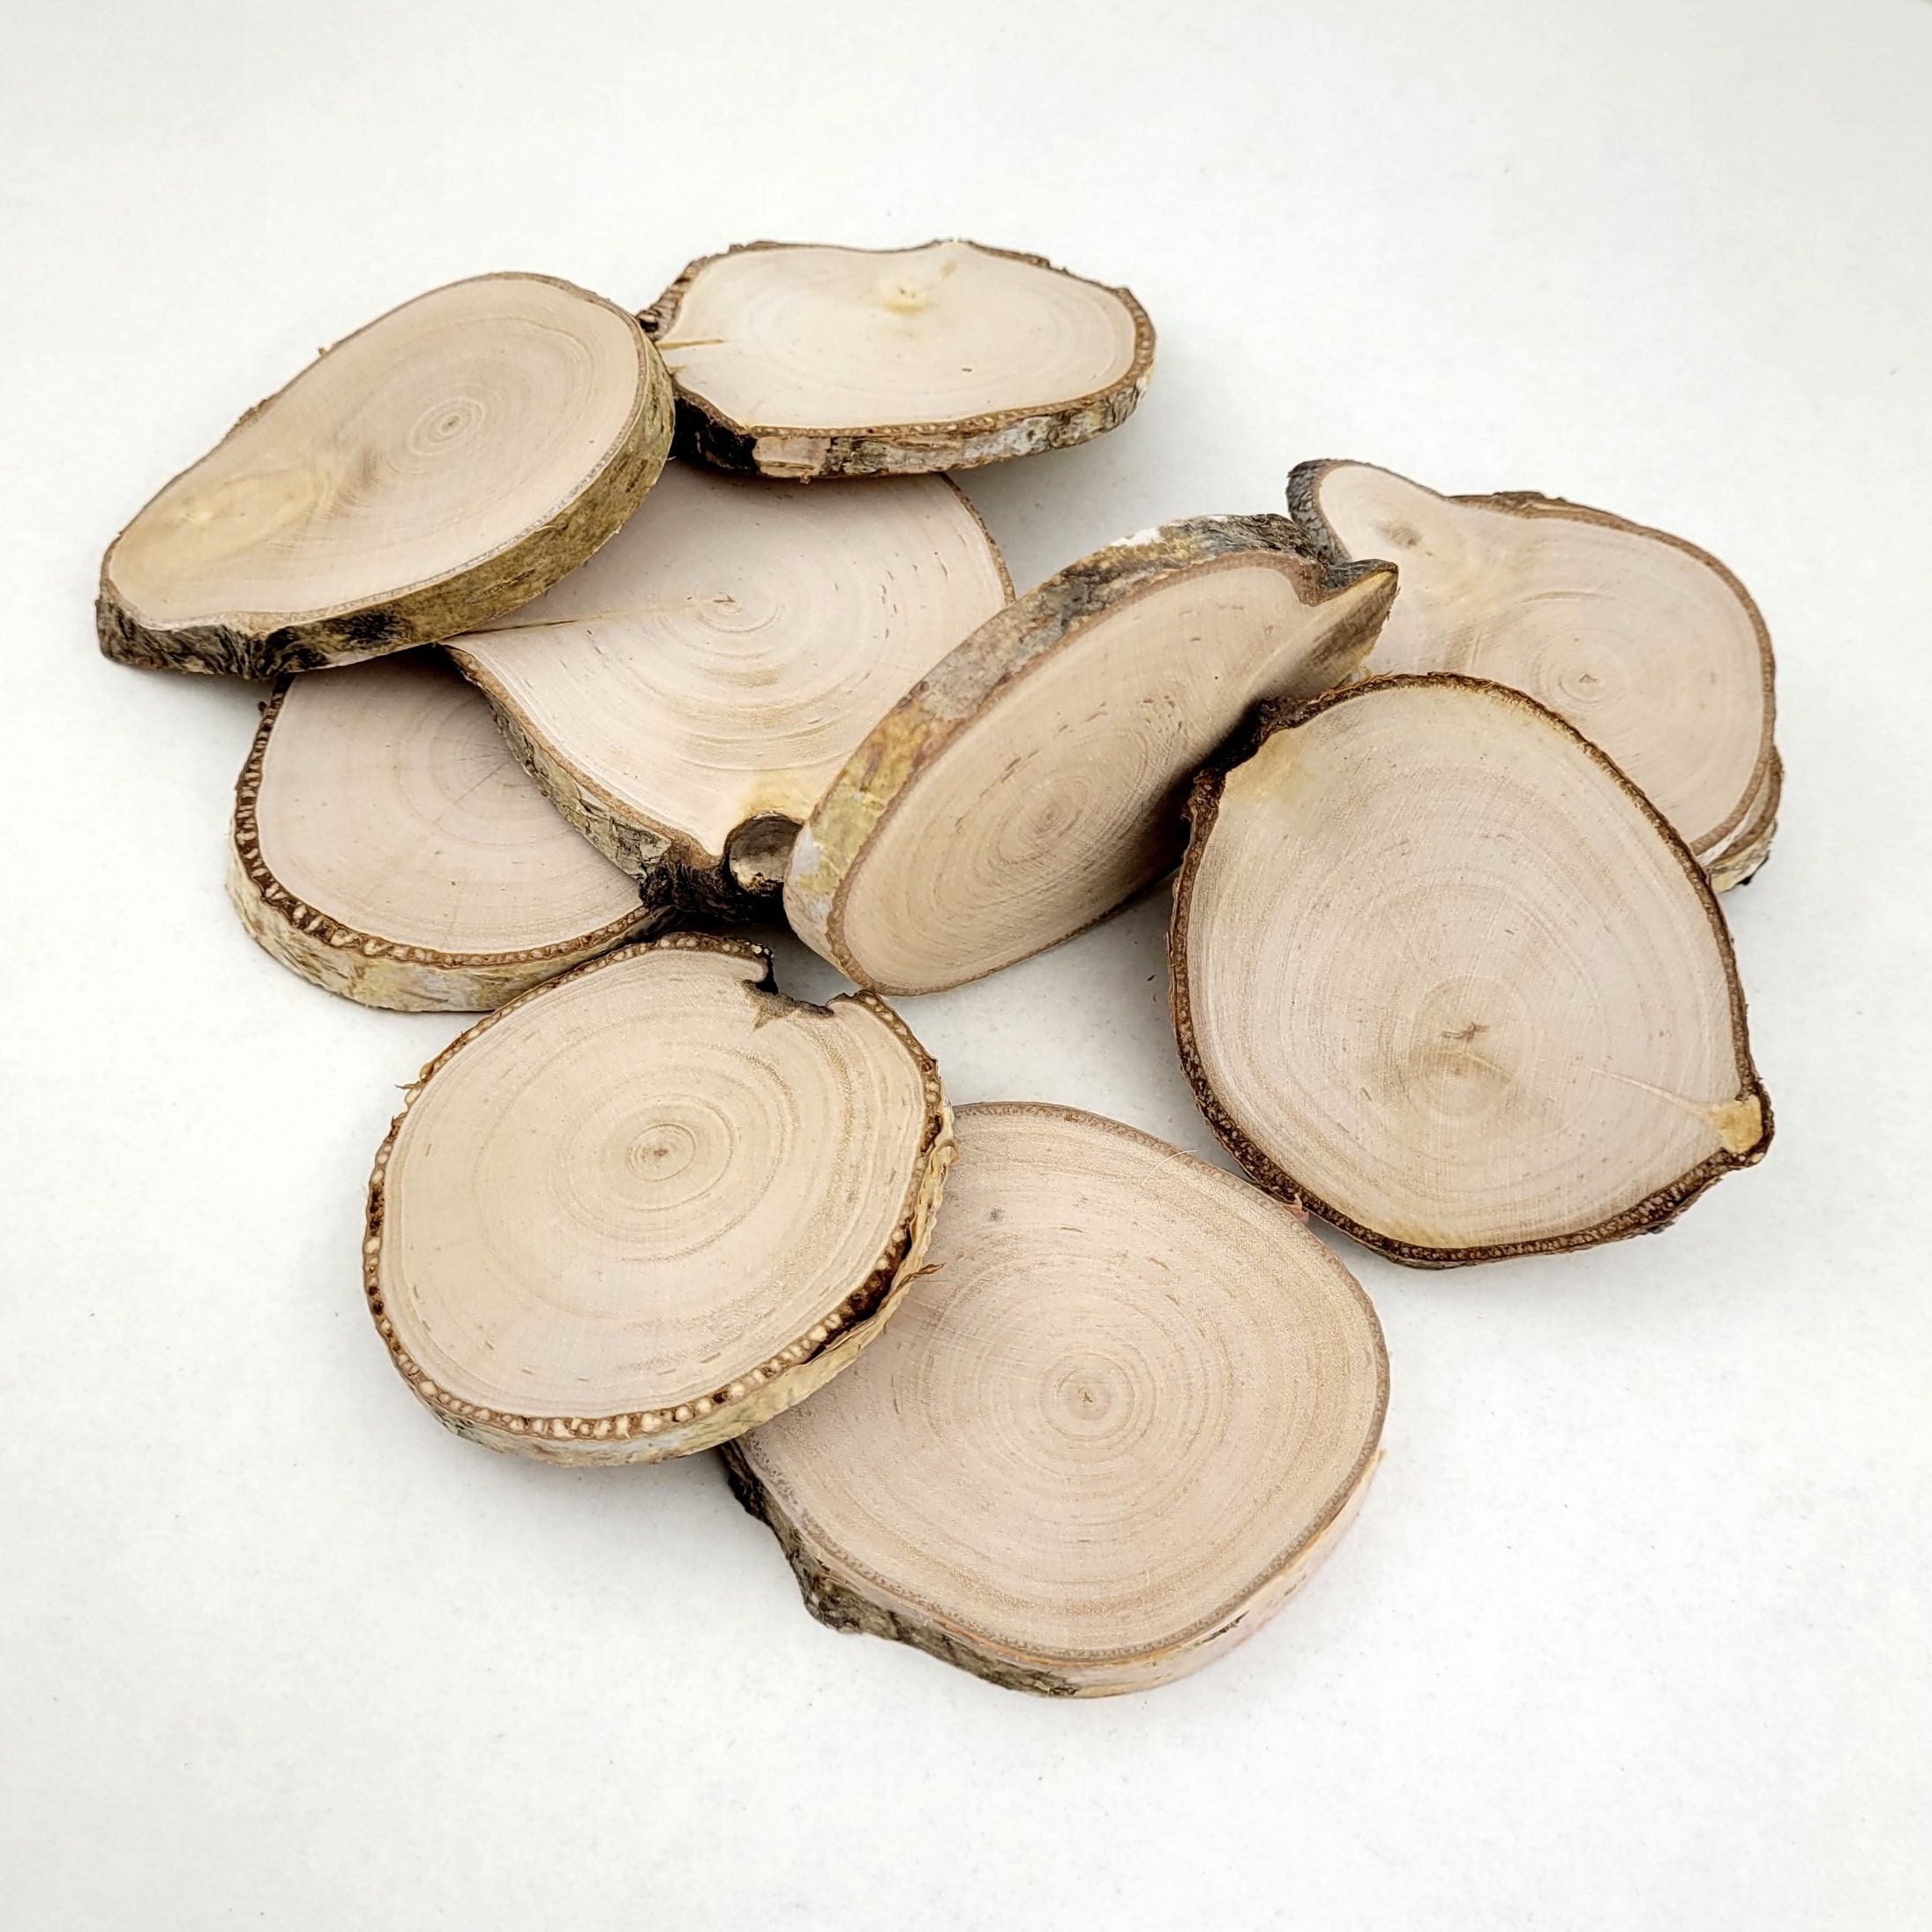 Birch Wood Tree Slices, Natural Wood Rounds for Crafts Ornaments